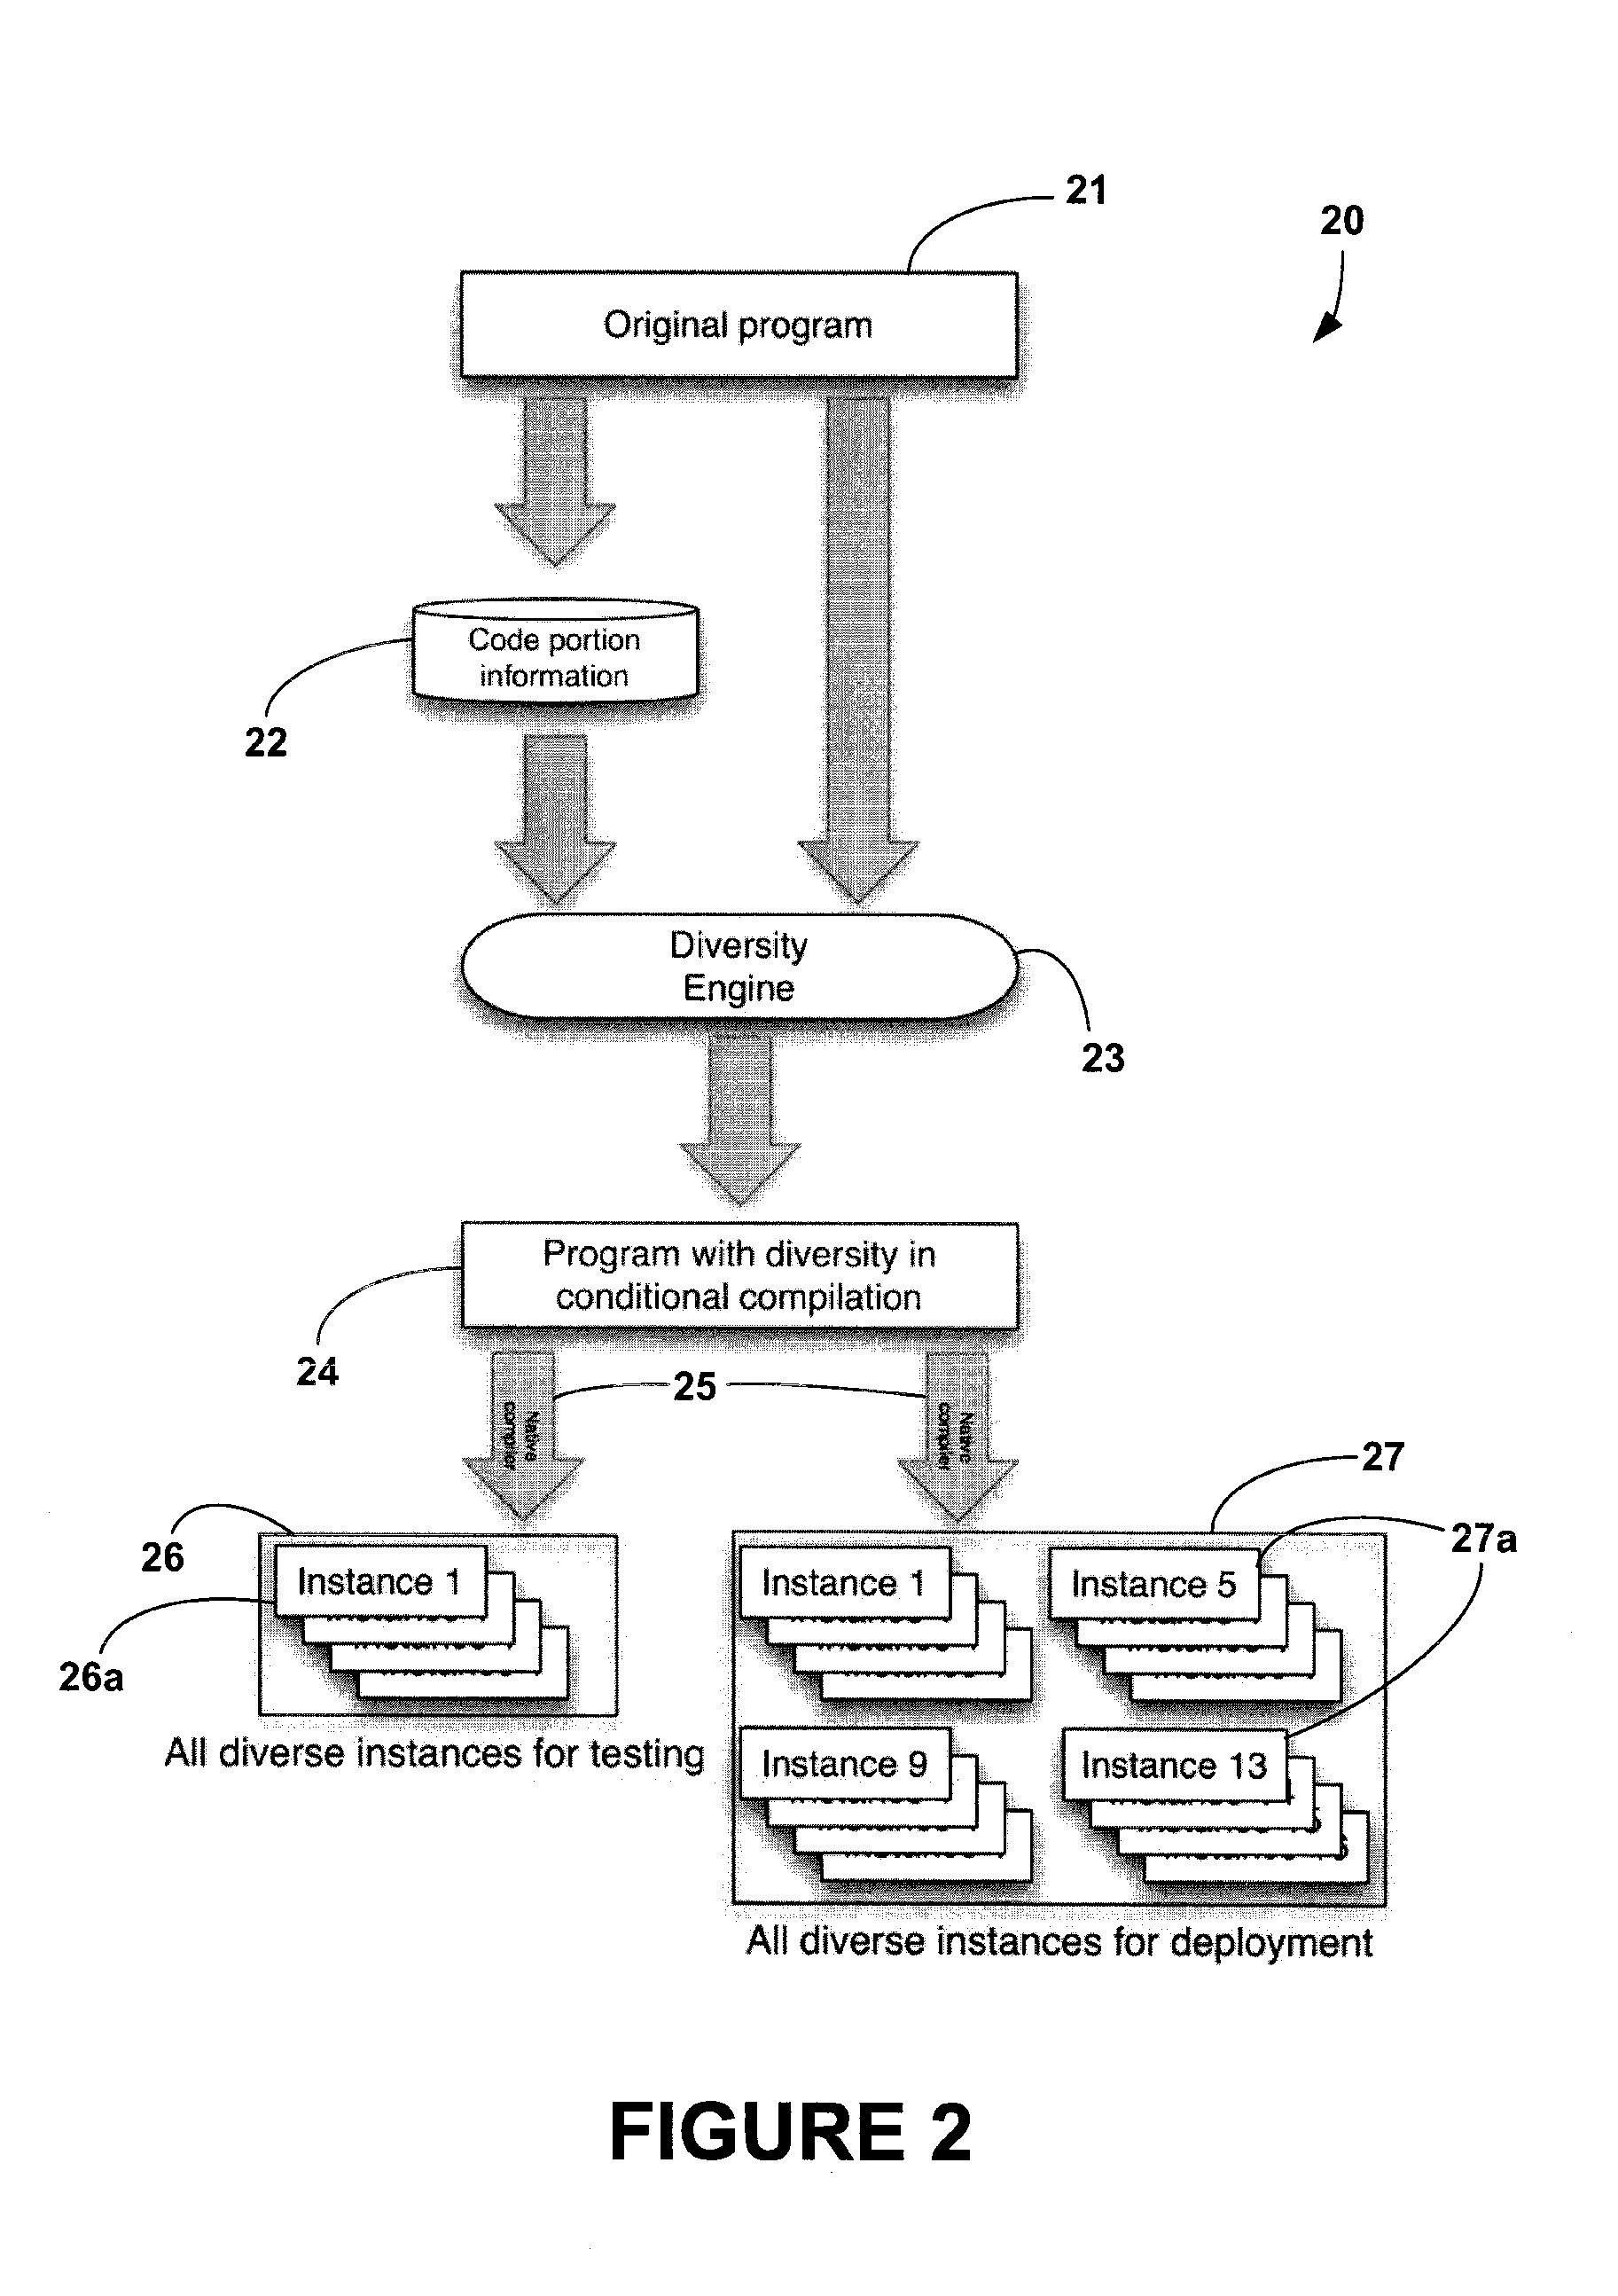 System and Method for Efficiently Deploying Massively Diverse Program Instances to Resist Differential Attacks